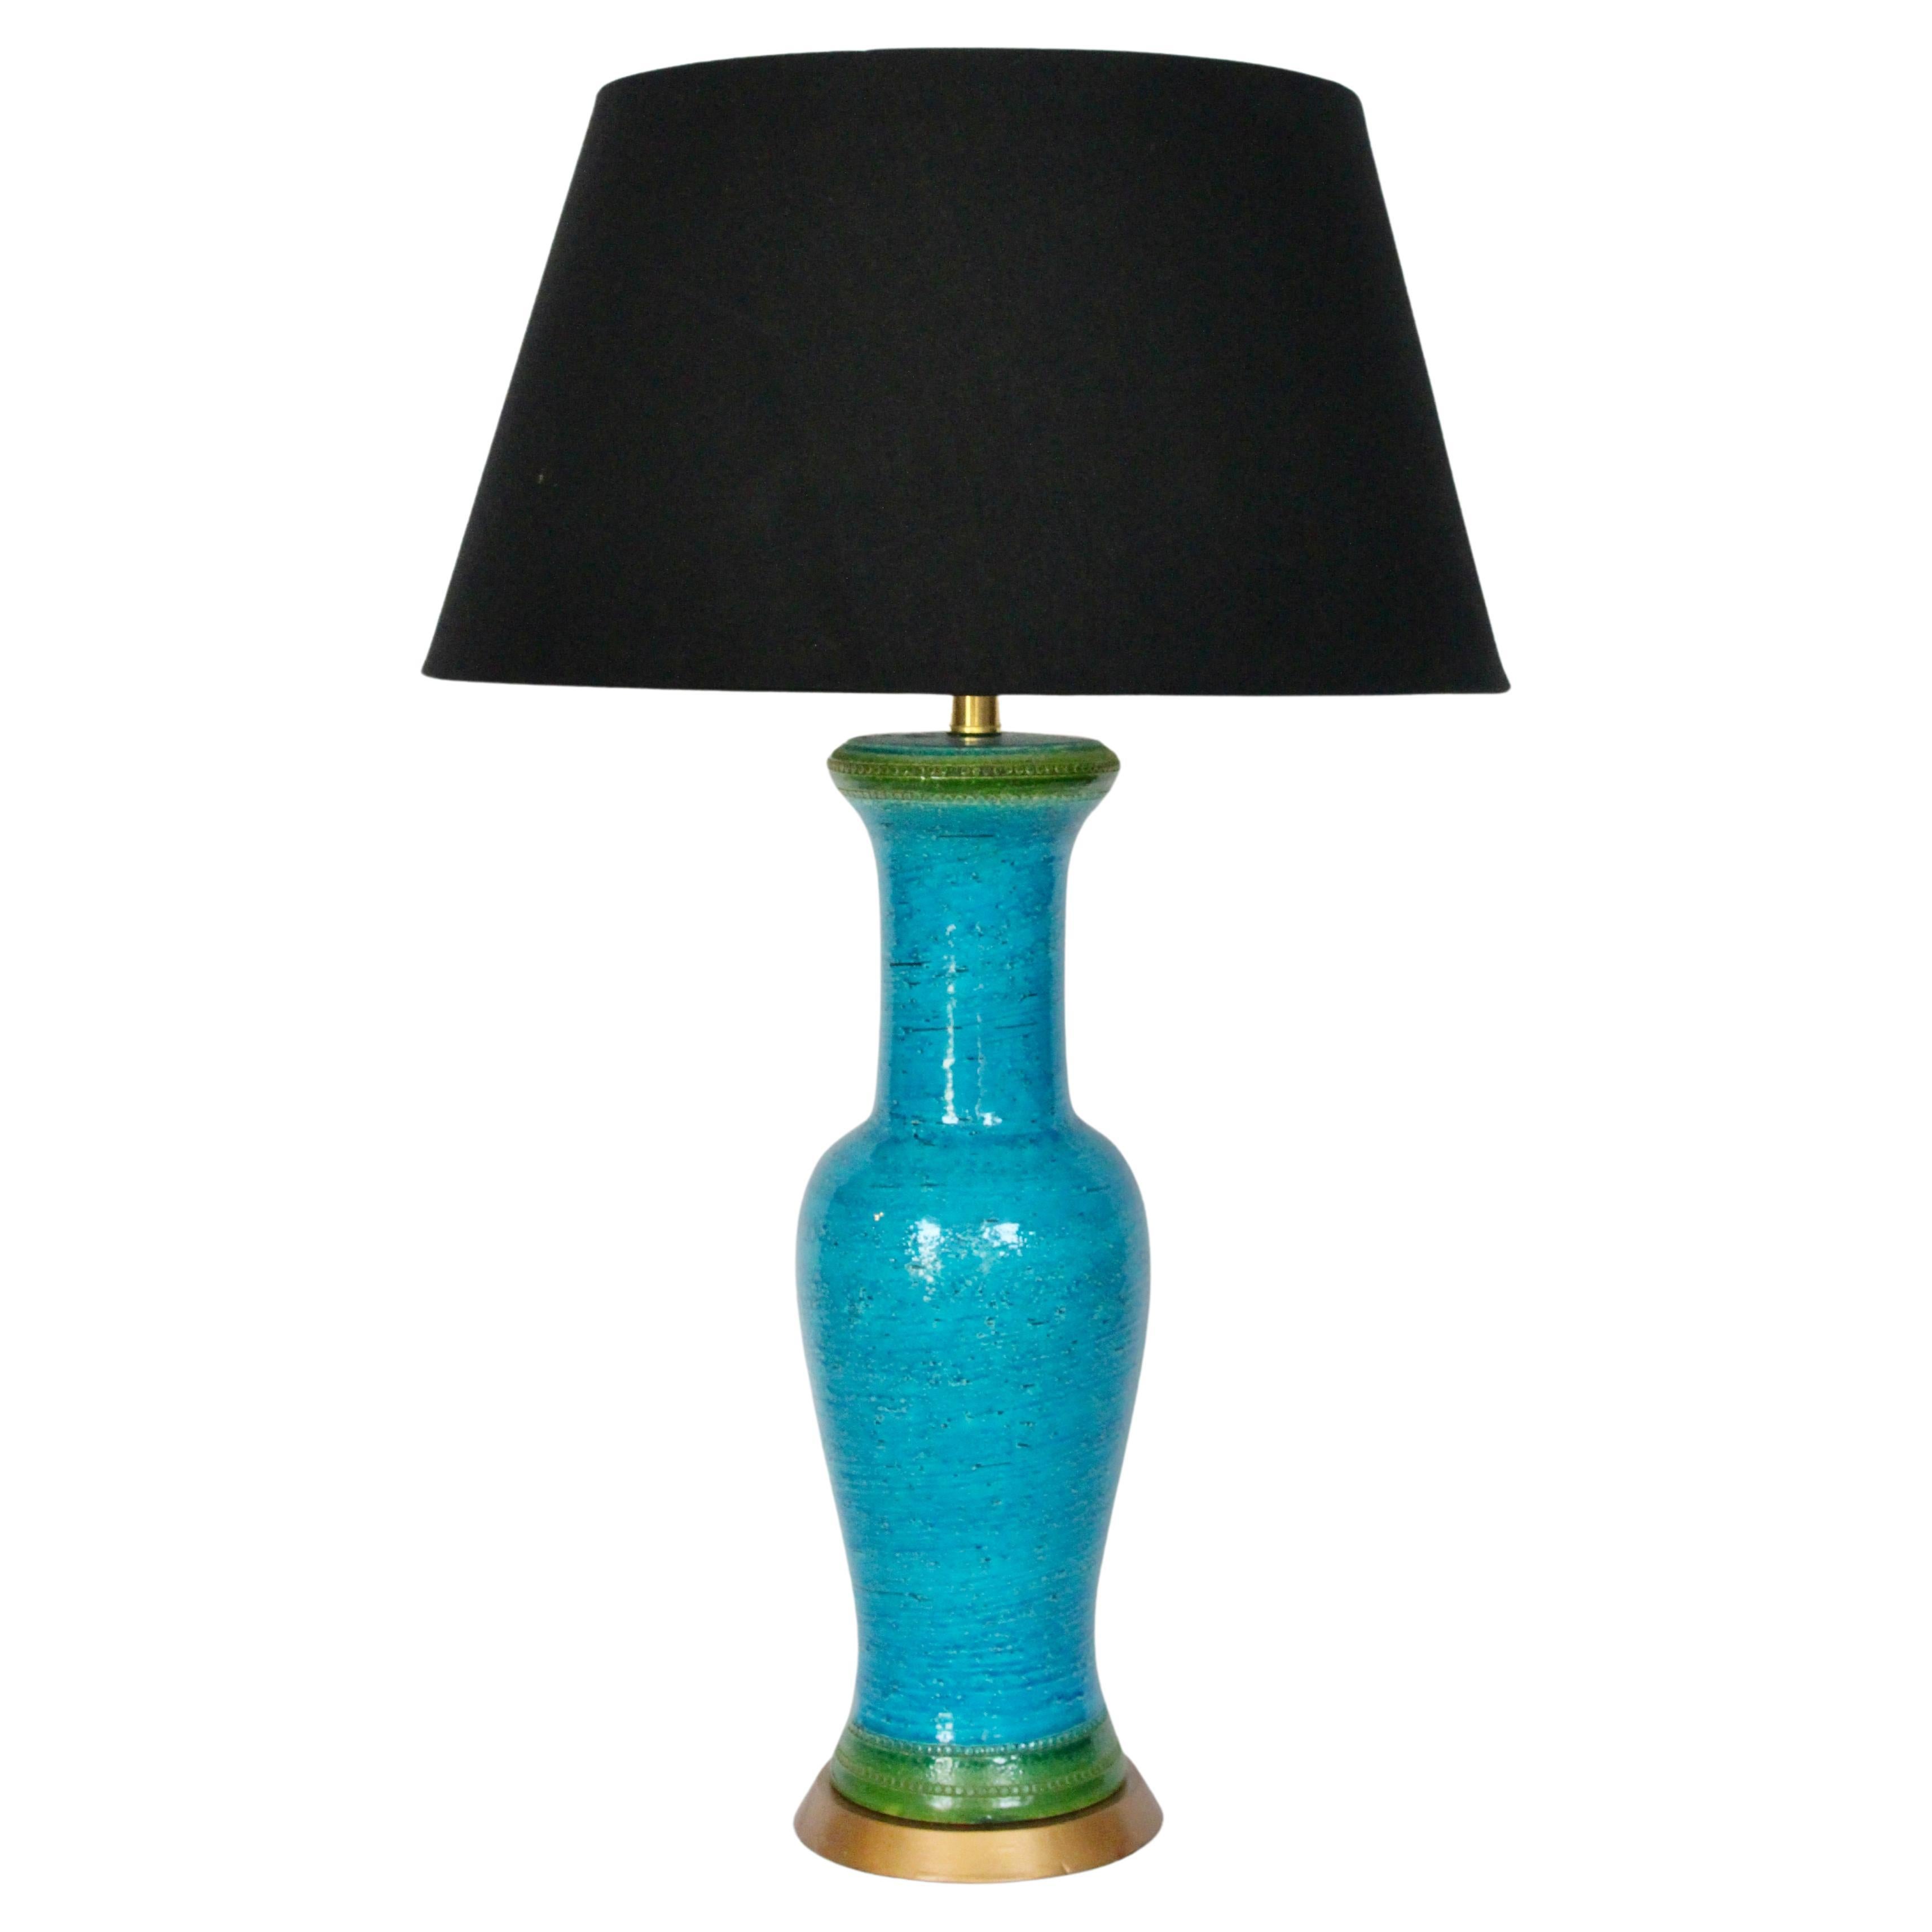 Substantial Aldo Londi Bitossi Turquoise with Top Green Stripe Table Lamp, 1950s